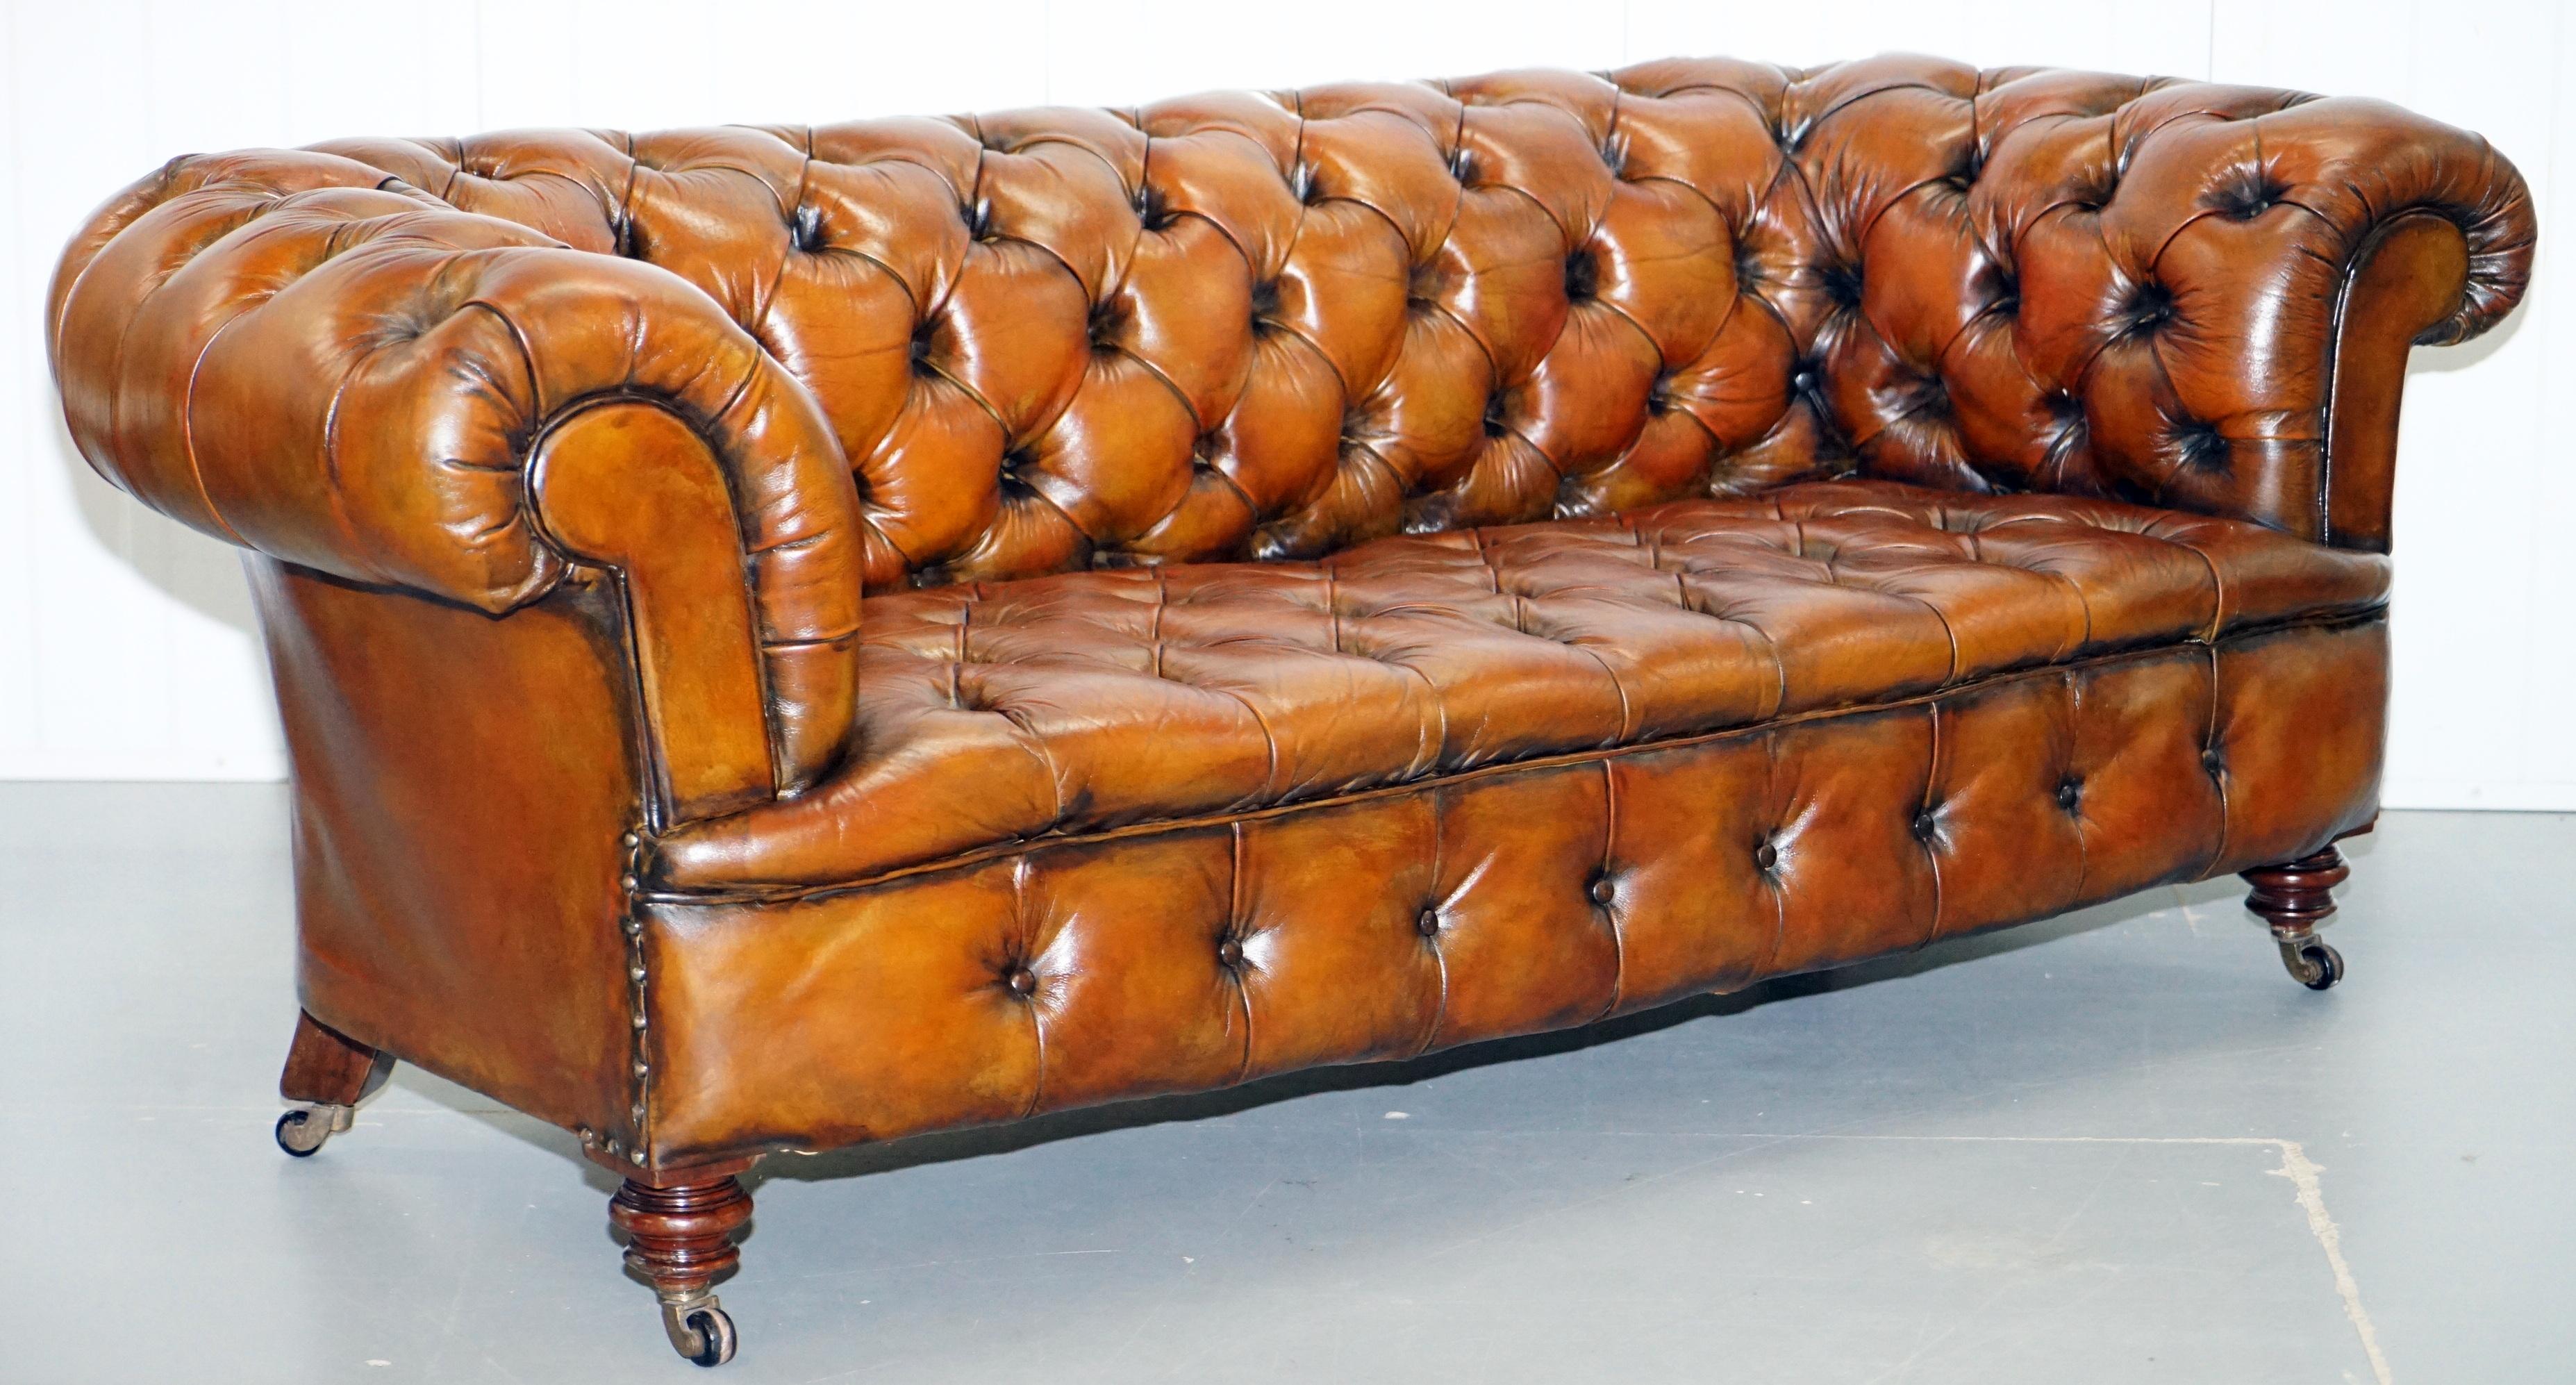 We are delighted to offer for sale this lovely rare original fully restored Victorian 1890 Cornelius V Smith Stamped aged whiskey brown leather Chesterfield sofa

Please note the delivery fee listed is just a guide

What can I say, if you’re in